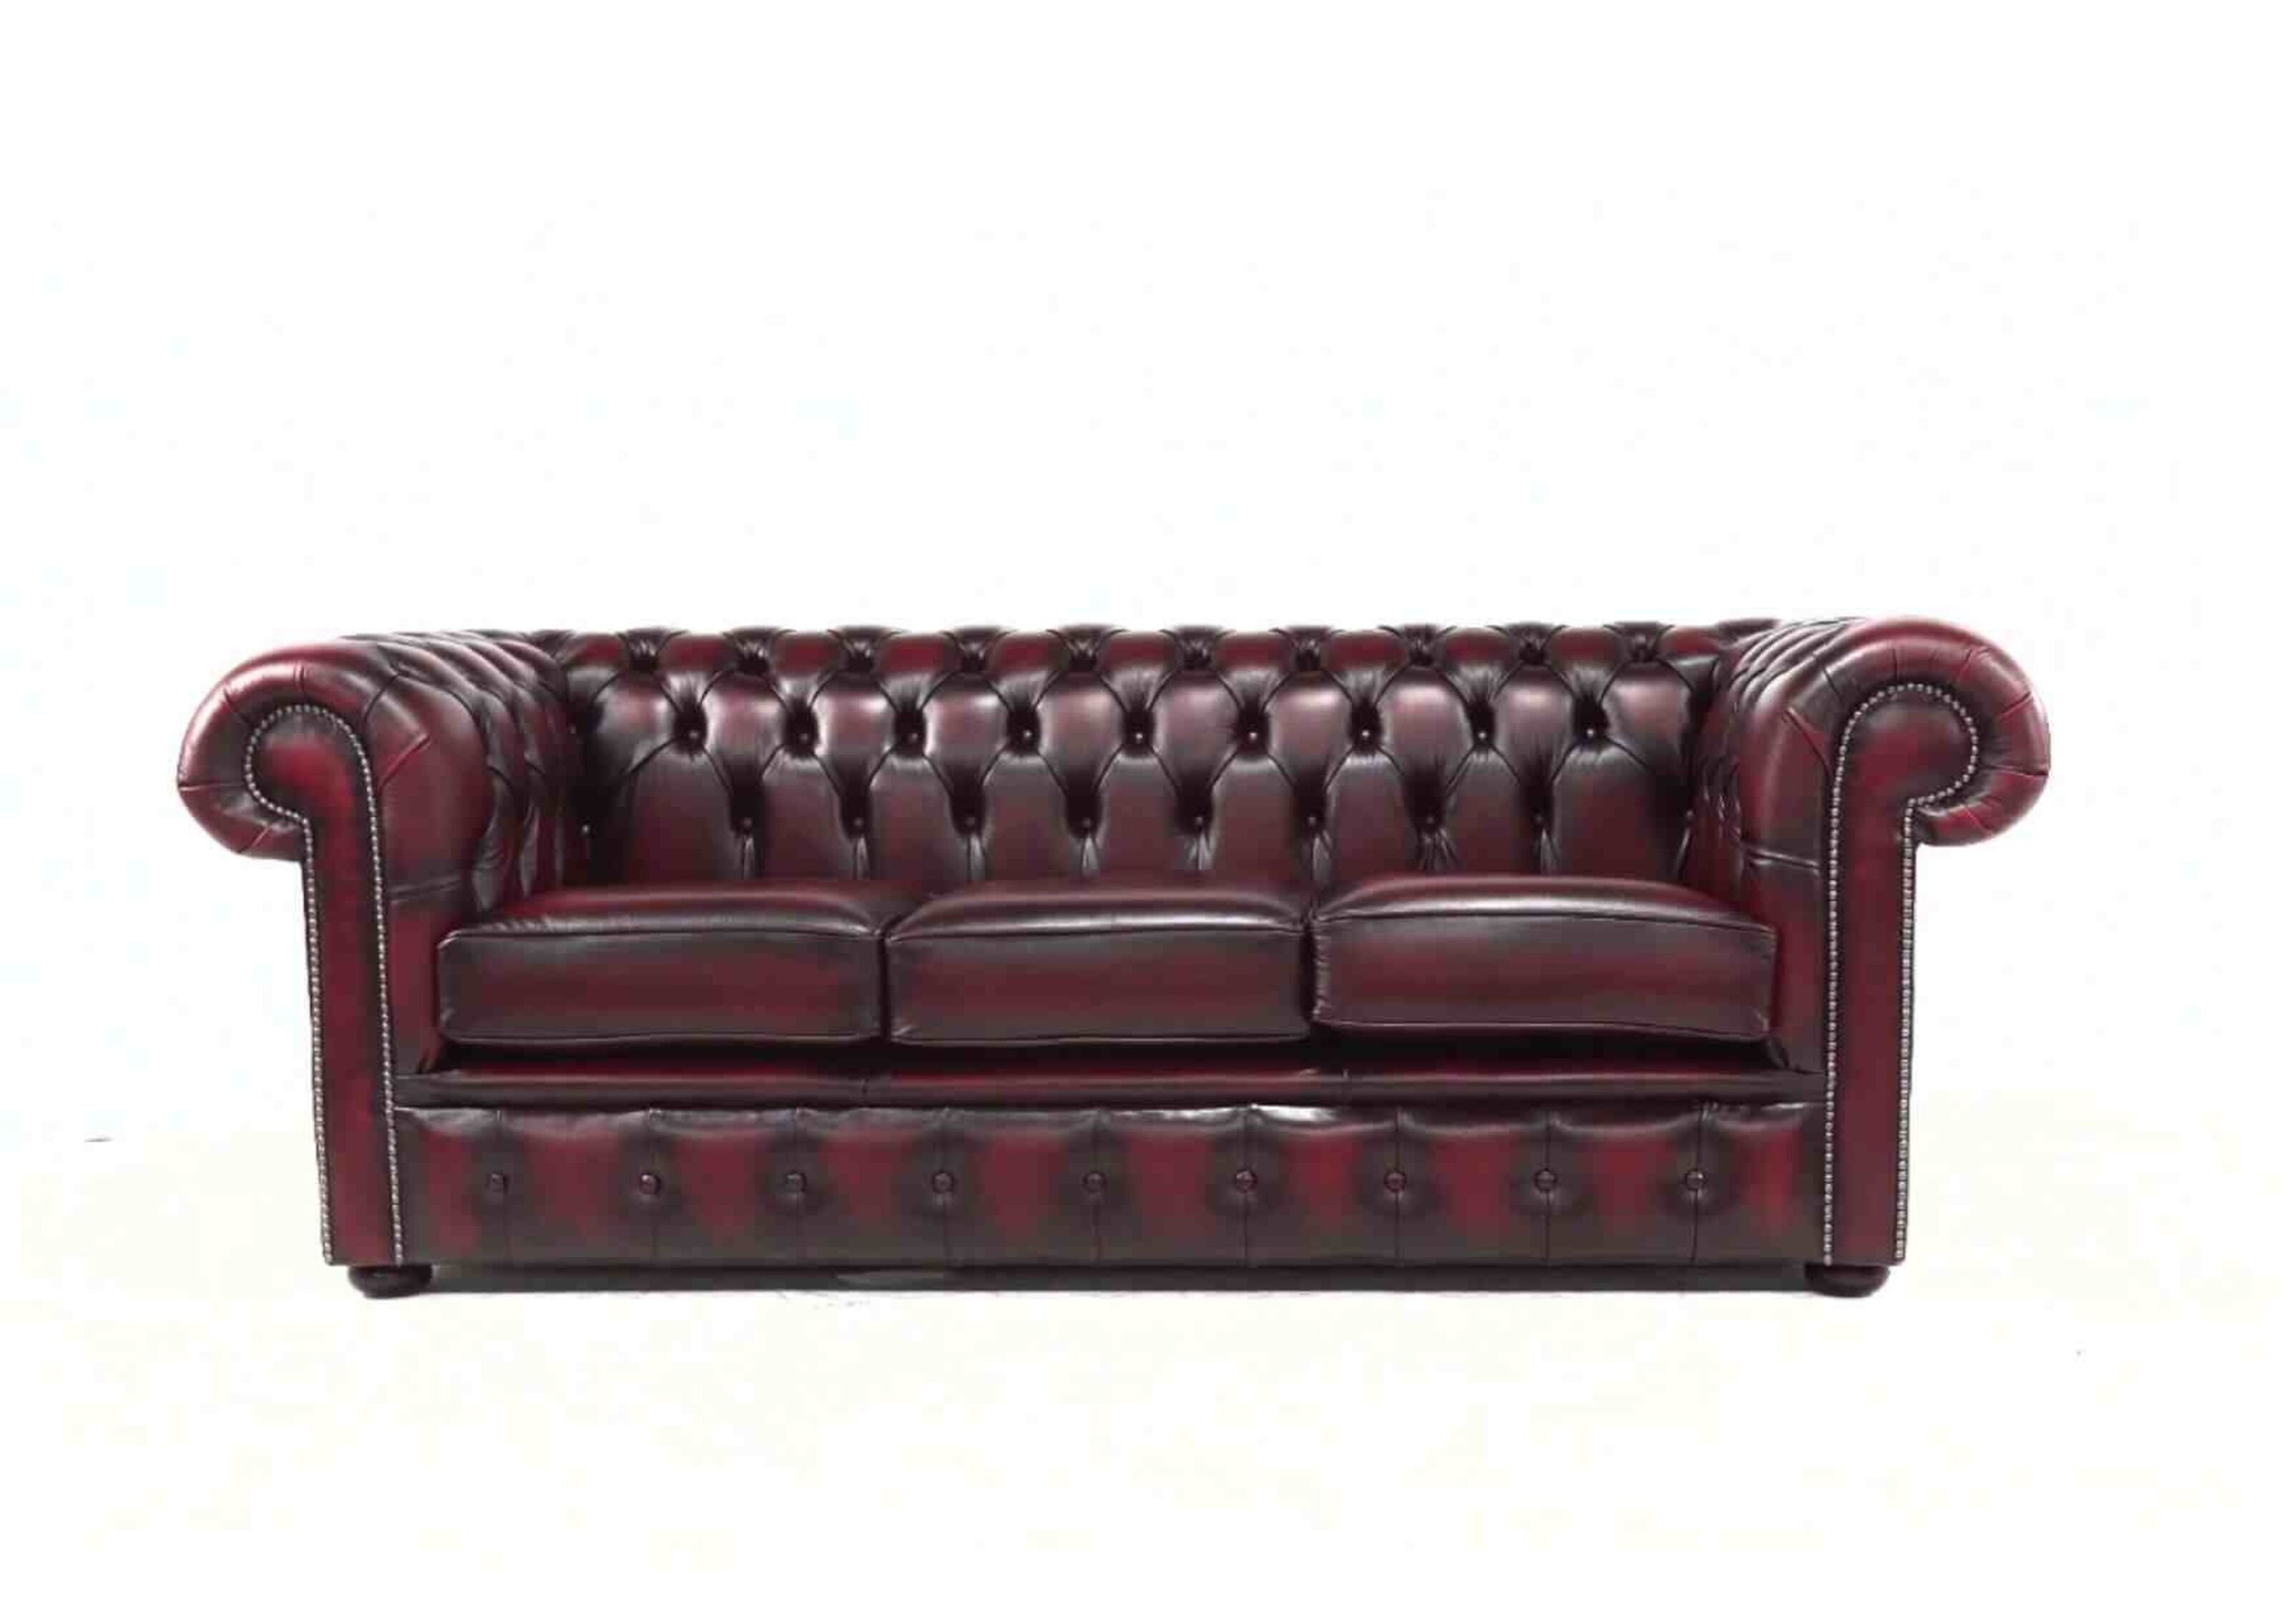 Couch Chronicles Exploring the Range of Styles in Chesterfield Sofas  %Post Title